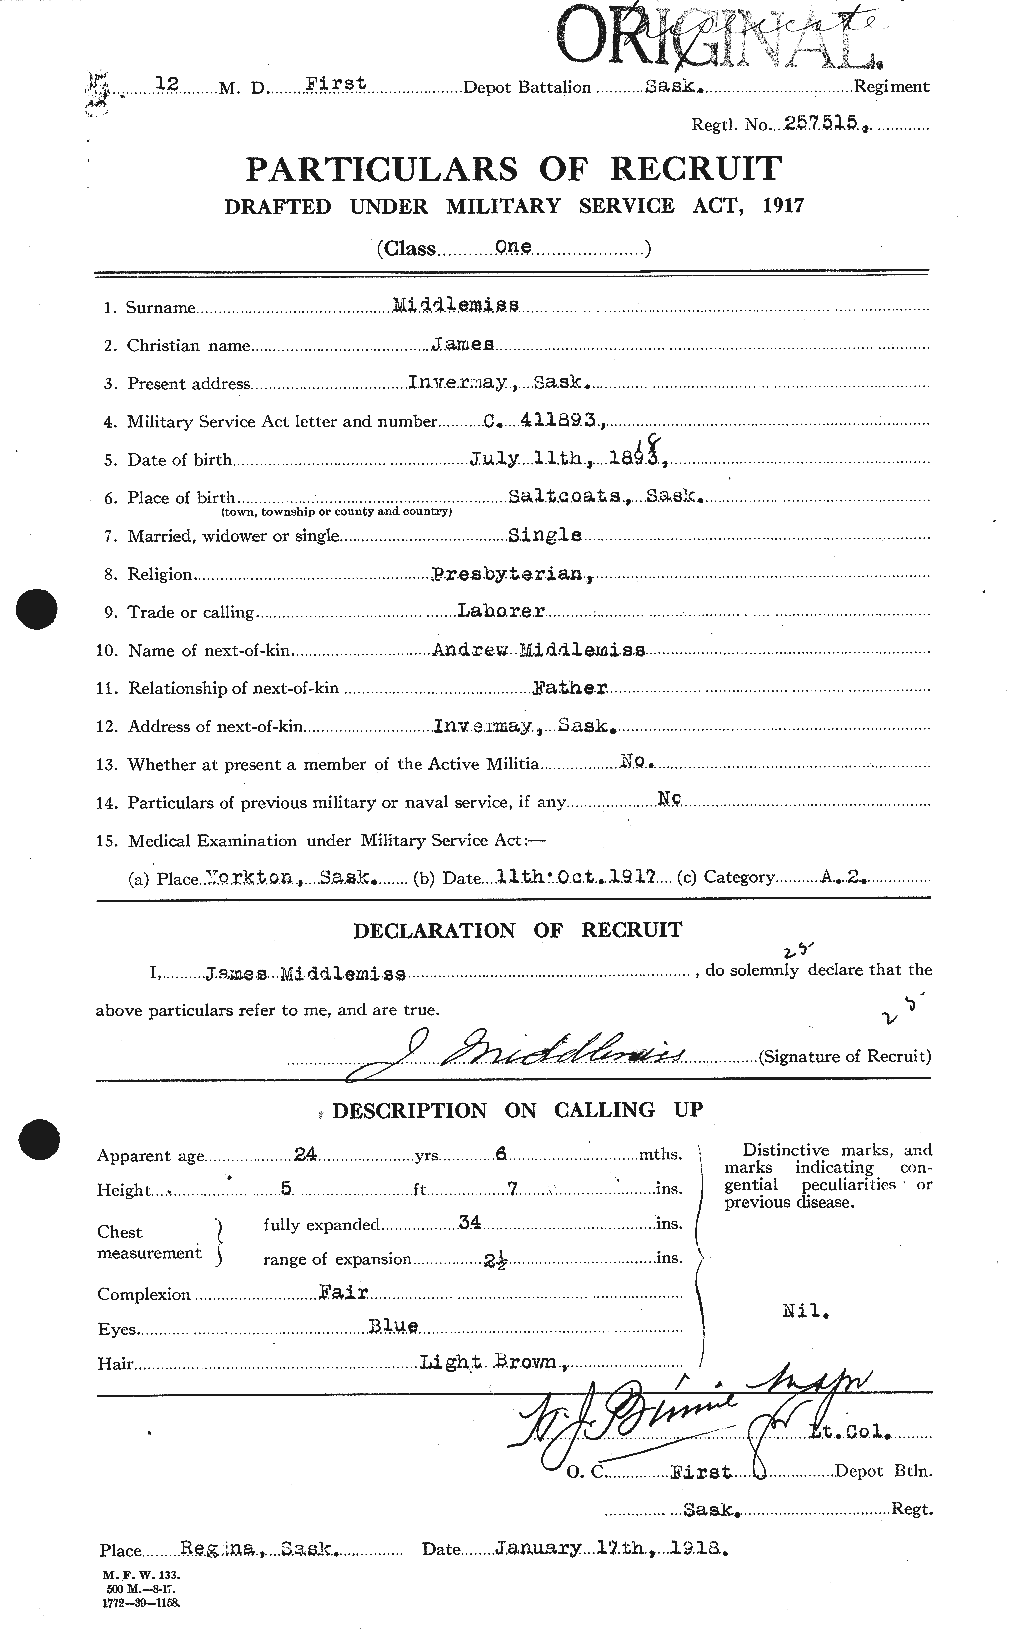 Personnel Records of the First World War - CEF 493005a